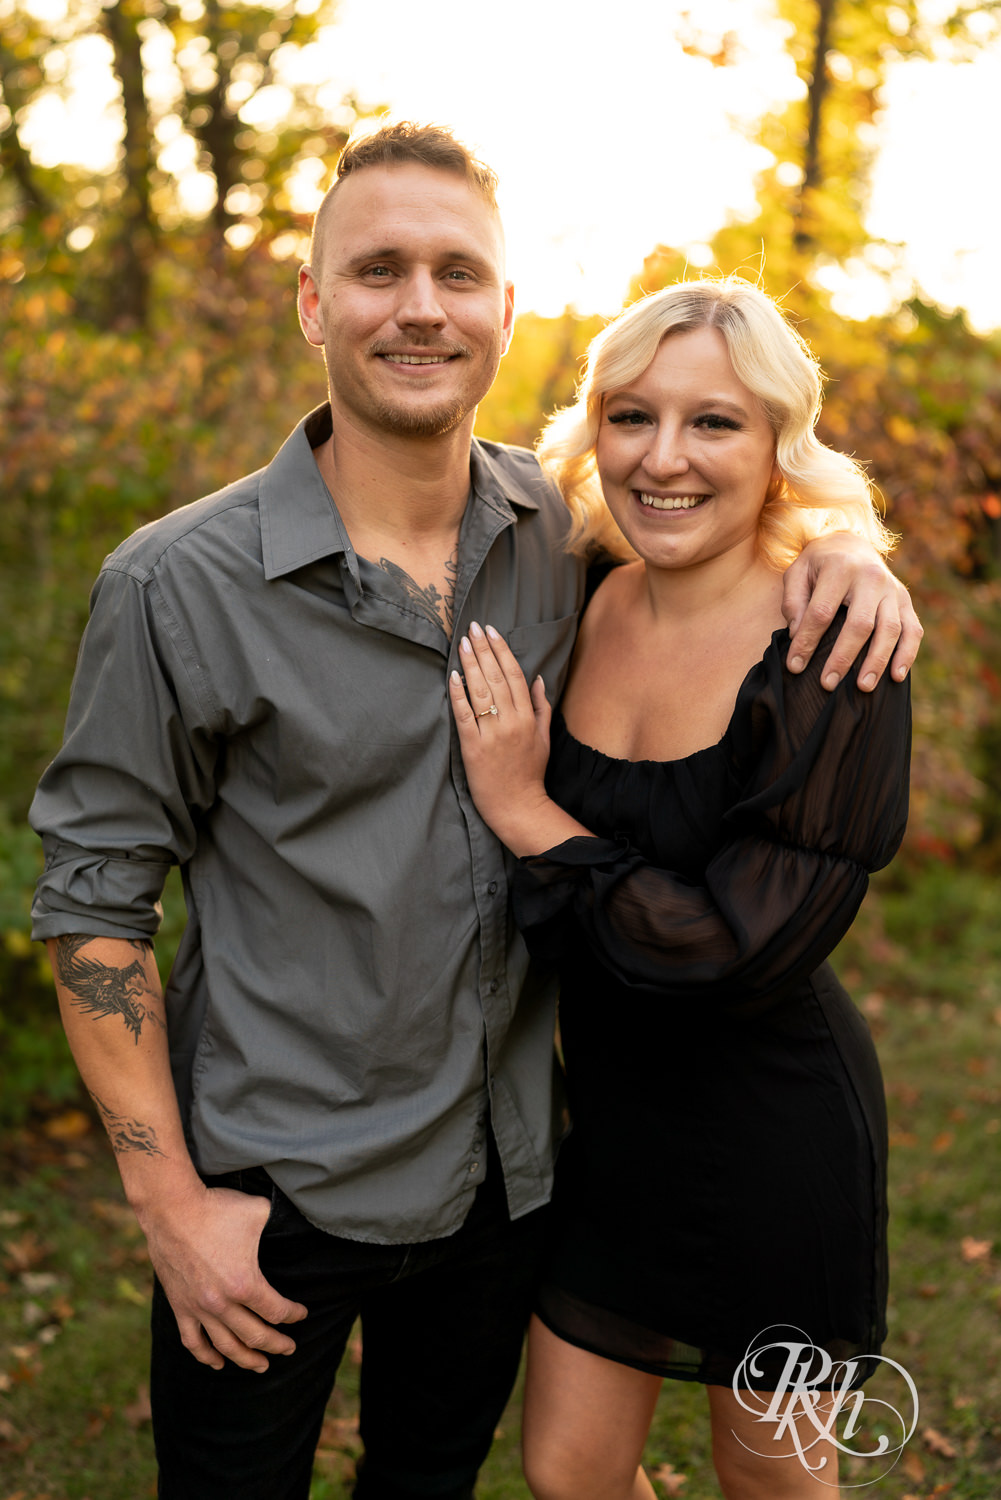 Blond woman in black dress and man in dress shirt smile during sunset engagement photos at Lebanon Hills Regional Park in Eagan, Minnesota.